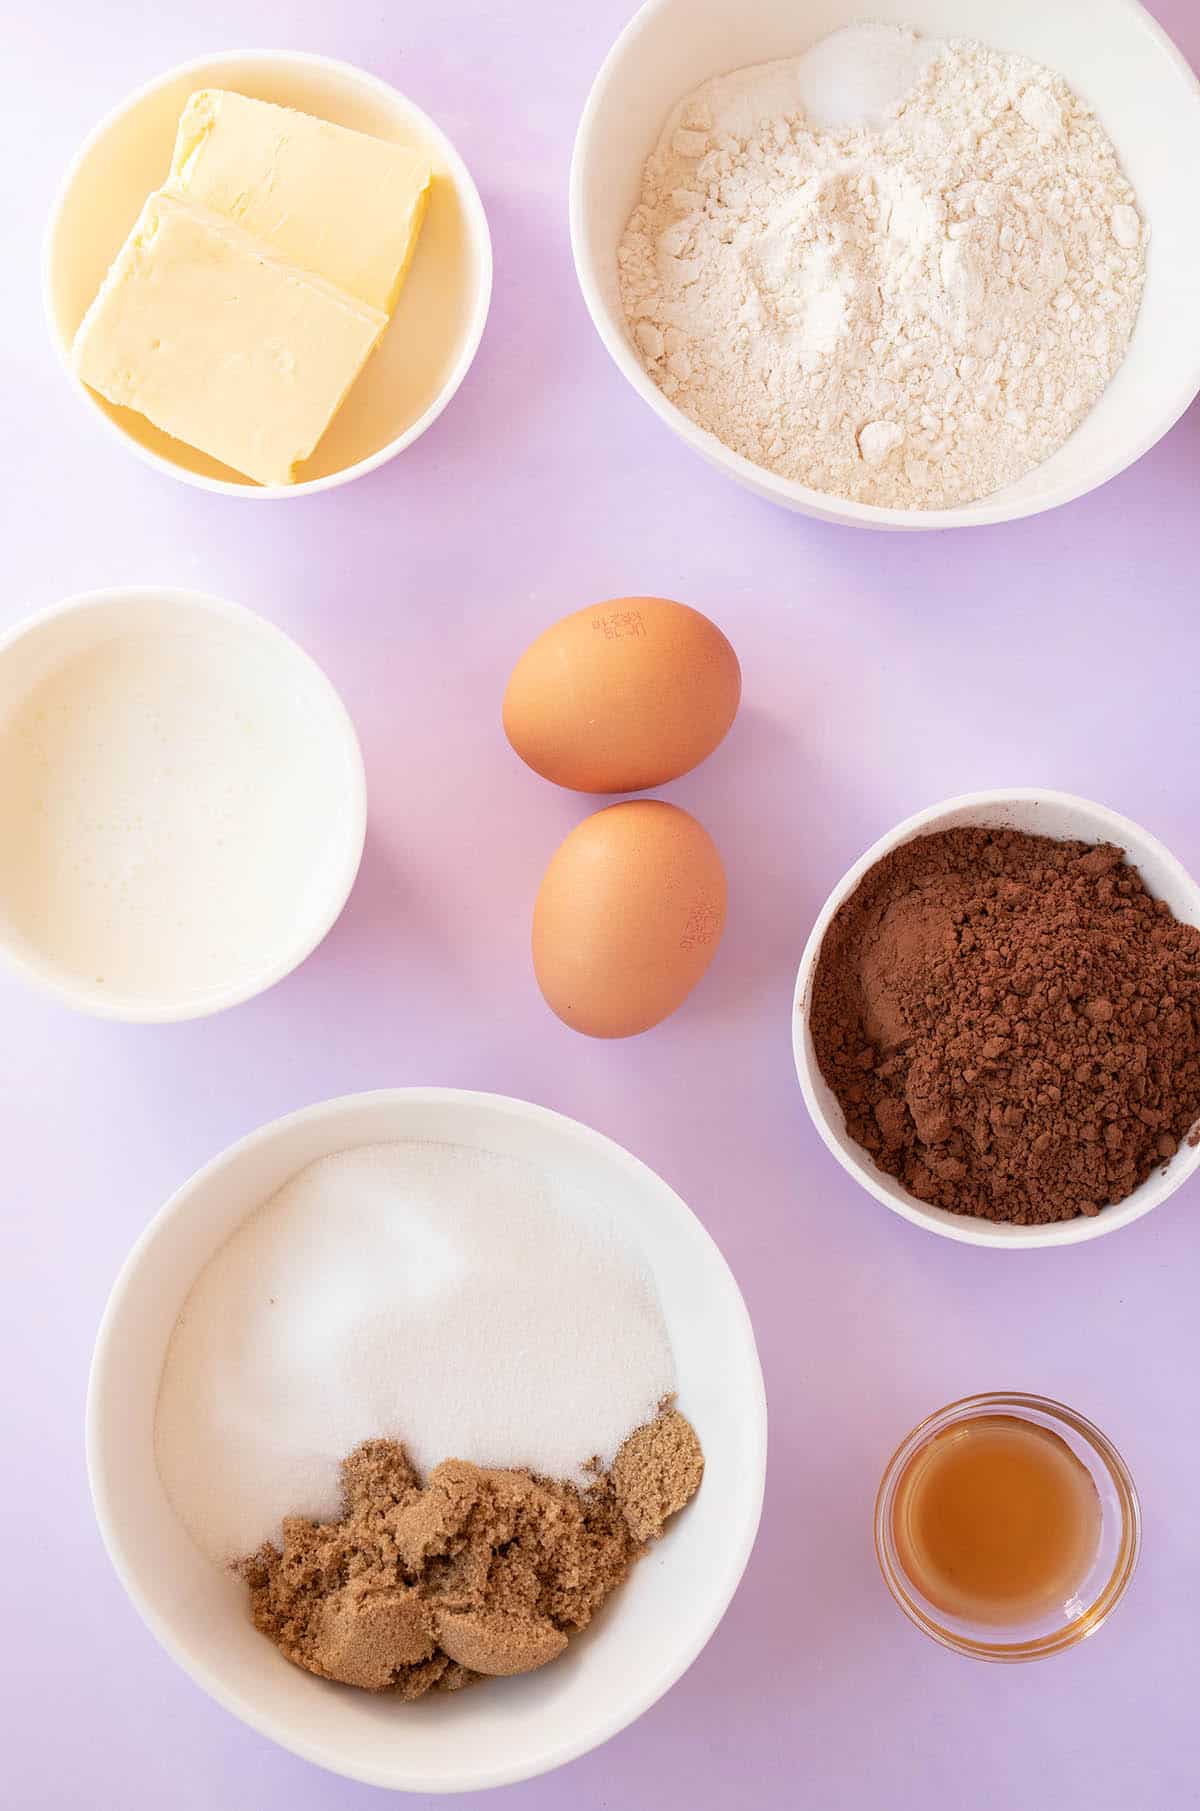 All the ingredients needed to make Nutella Cupcakes at home on a purple background.